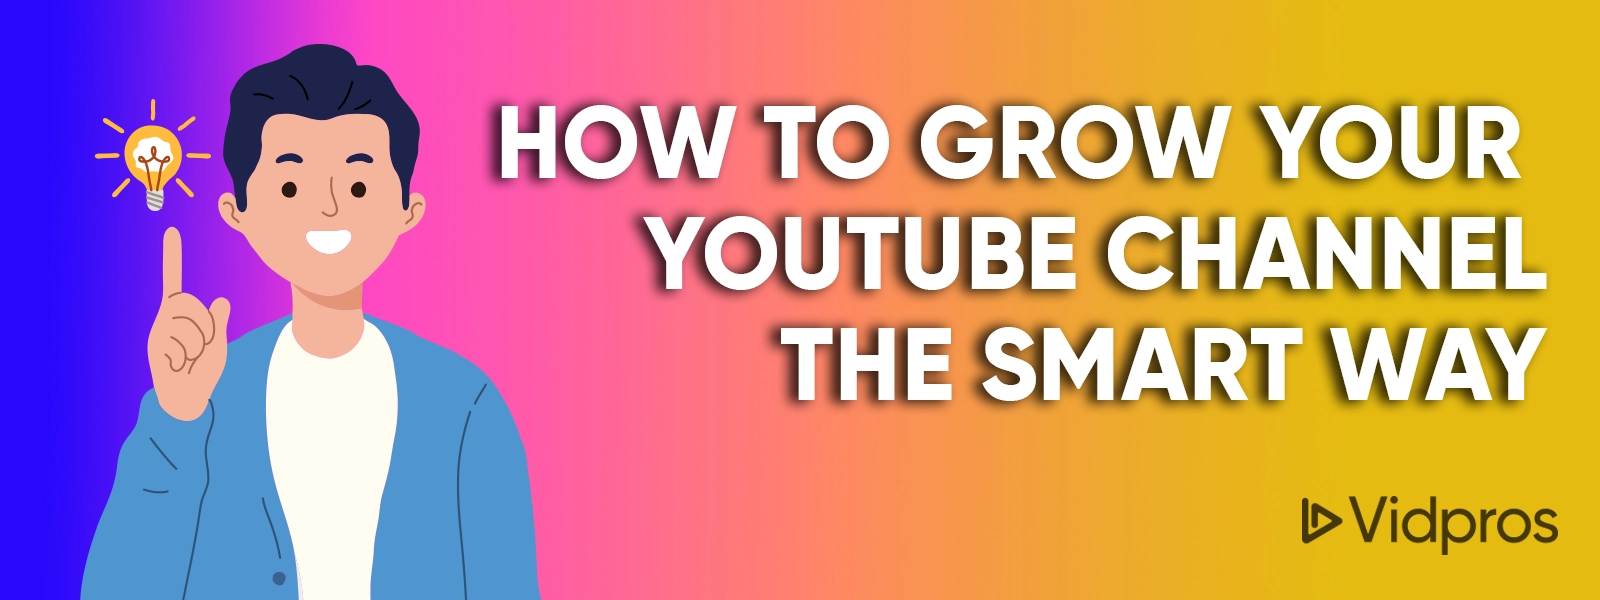 How To Grow Your YouTube Channel The Smart Way